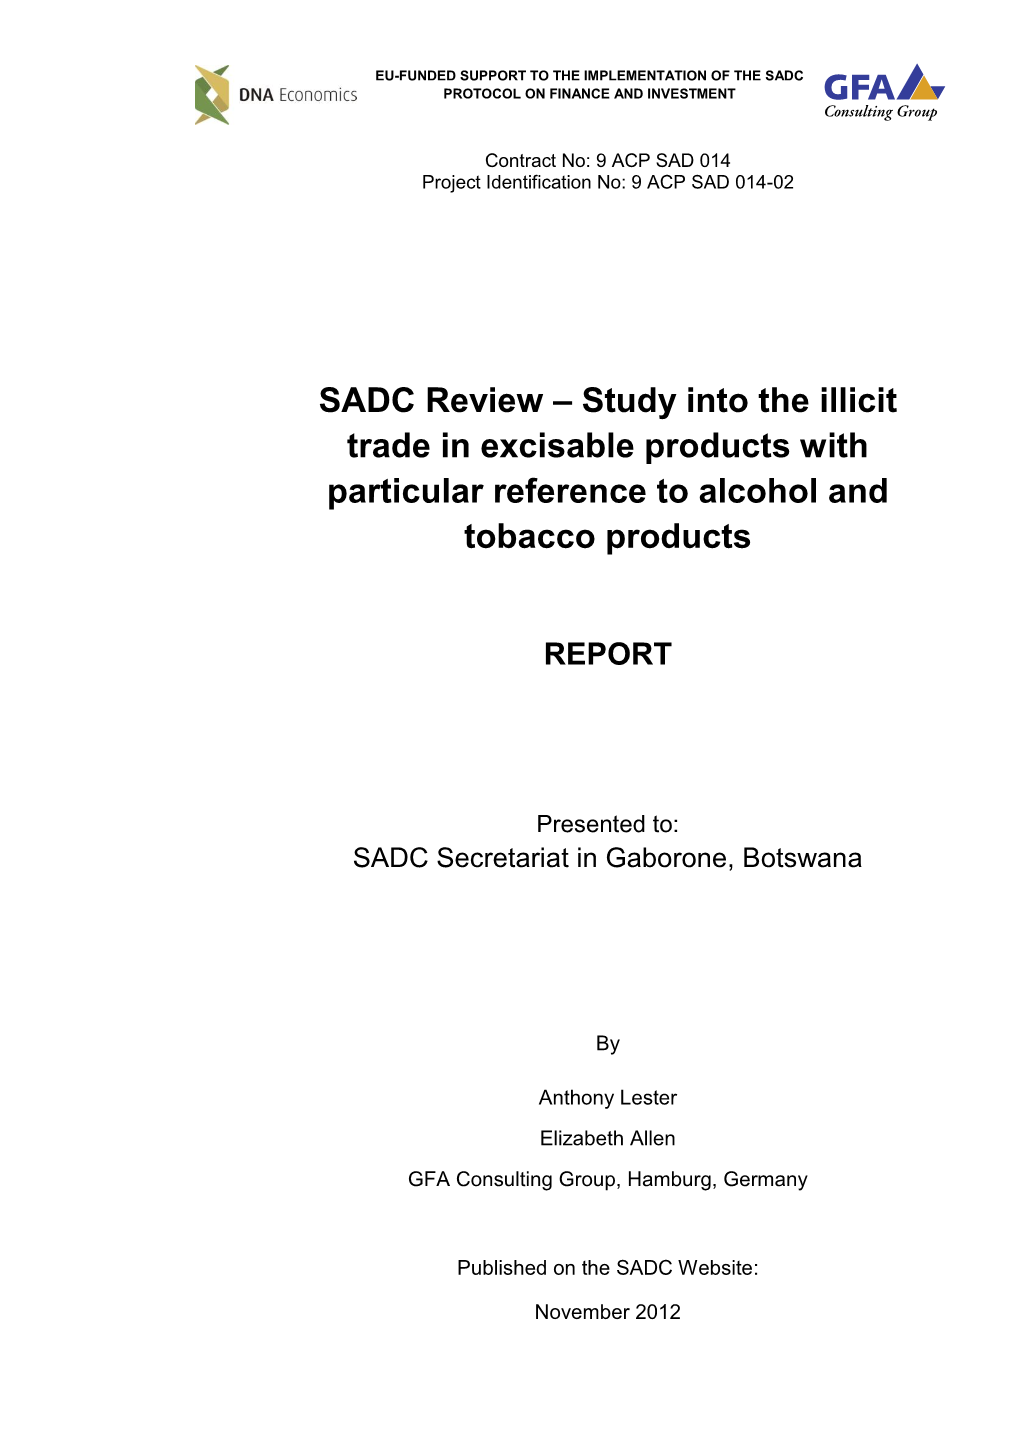 SADC Review – Study Into the Illicit Trade in Excisable Products with Particular Reference to Alcohol and Tobacco Products